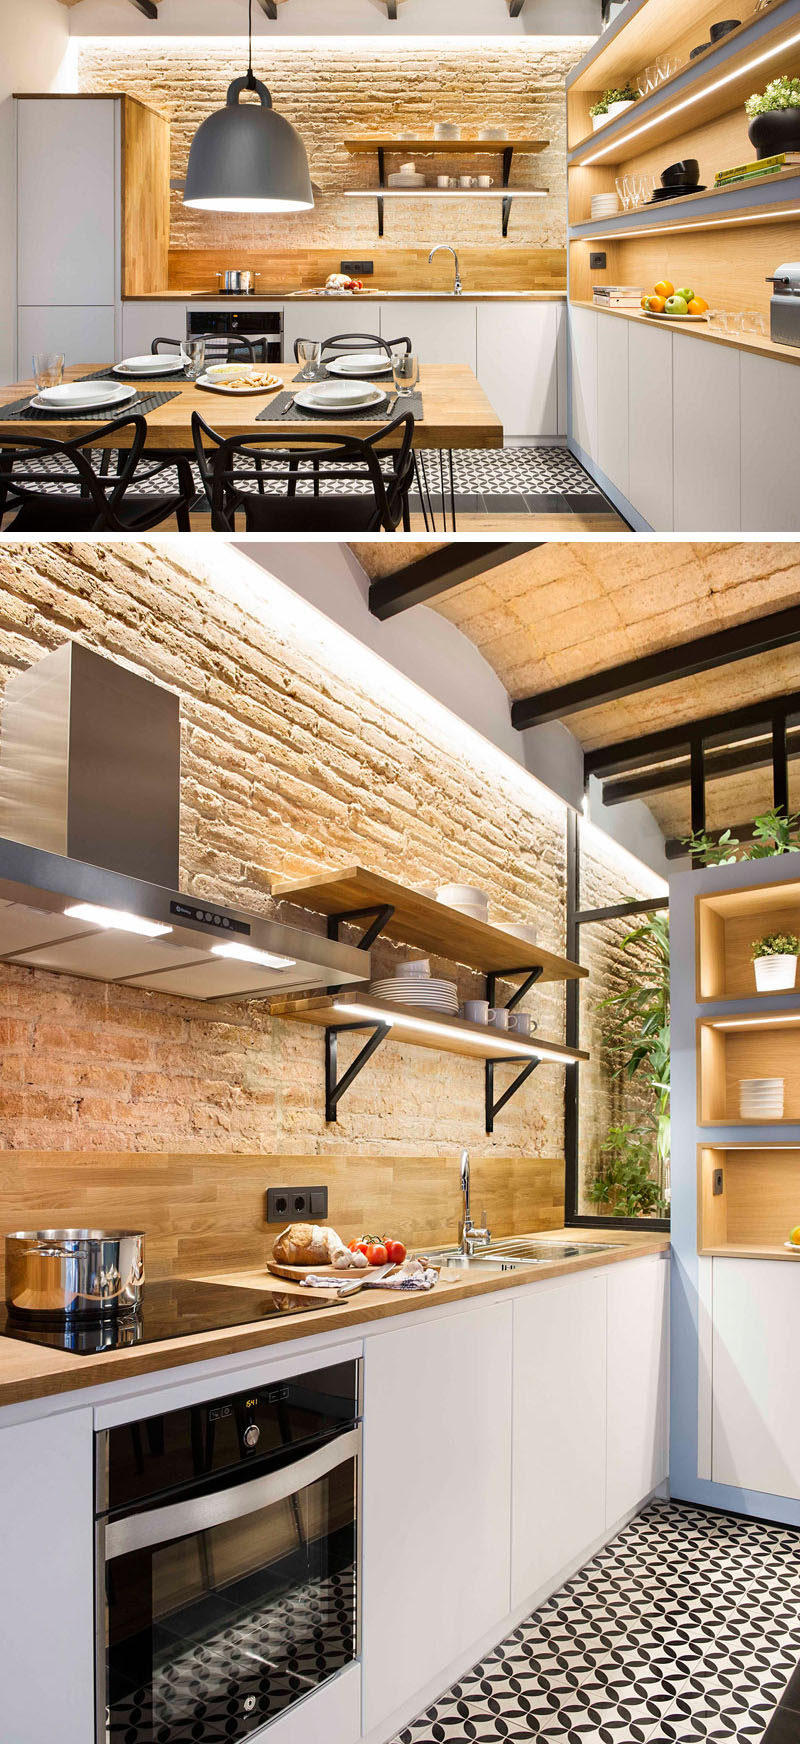 In this small modern kitchen, wood countertops and backsplash compliment the warm brick while white cabinets, stainless steel appliances, and open shelving with built in lighting help keep the space feeling bright. The combination of the new materials and the old exposed brick creates a modern feel mixed with a hint of rustic charm.